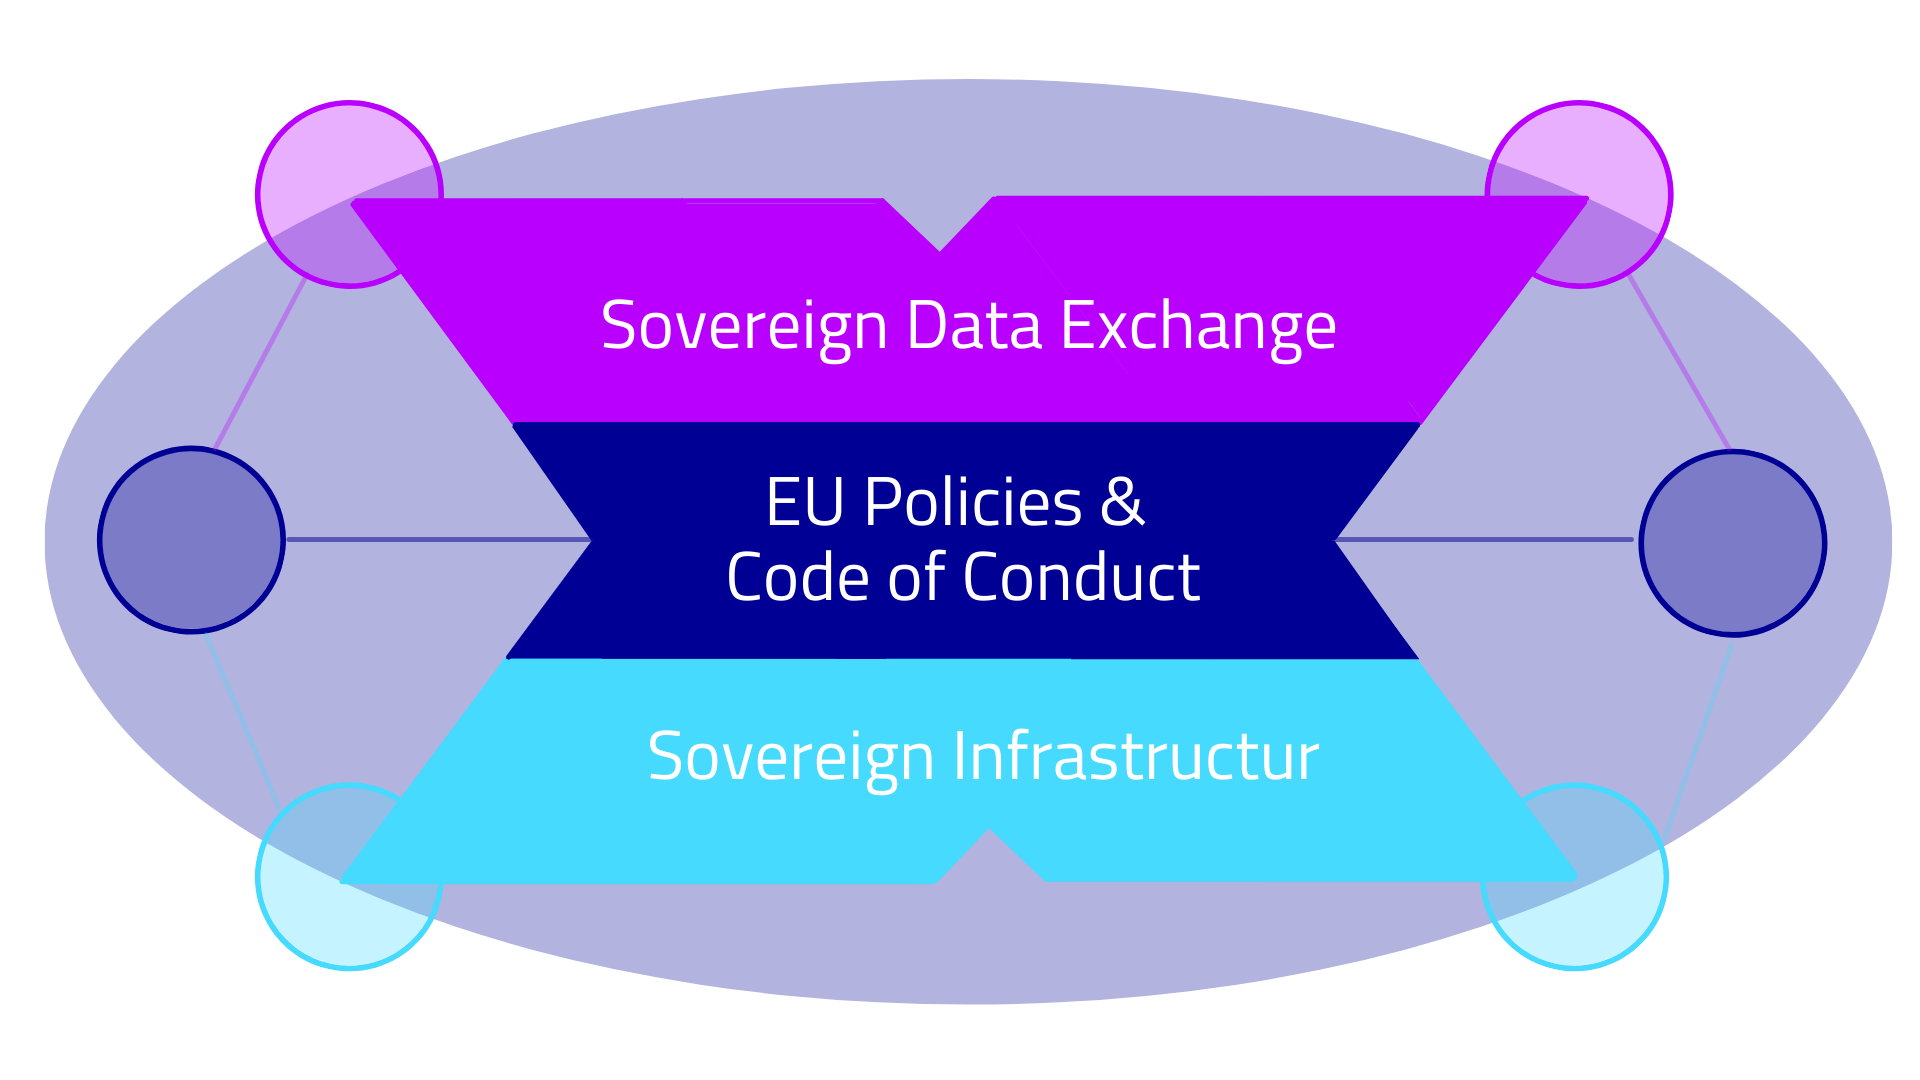 Explanation of main focus points of Gaia-X: Sovereign Data Exchange, EU Policies and Code of Conduct, Sovereign Infrastructure